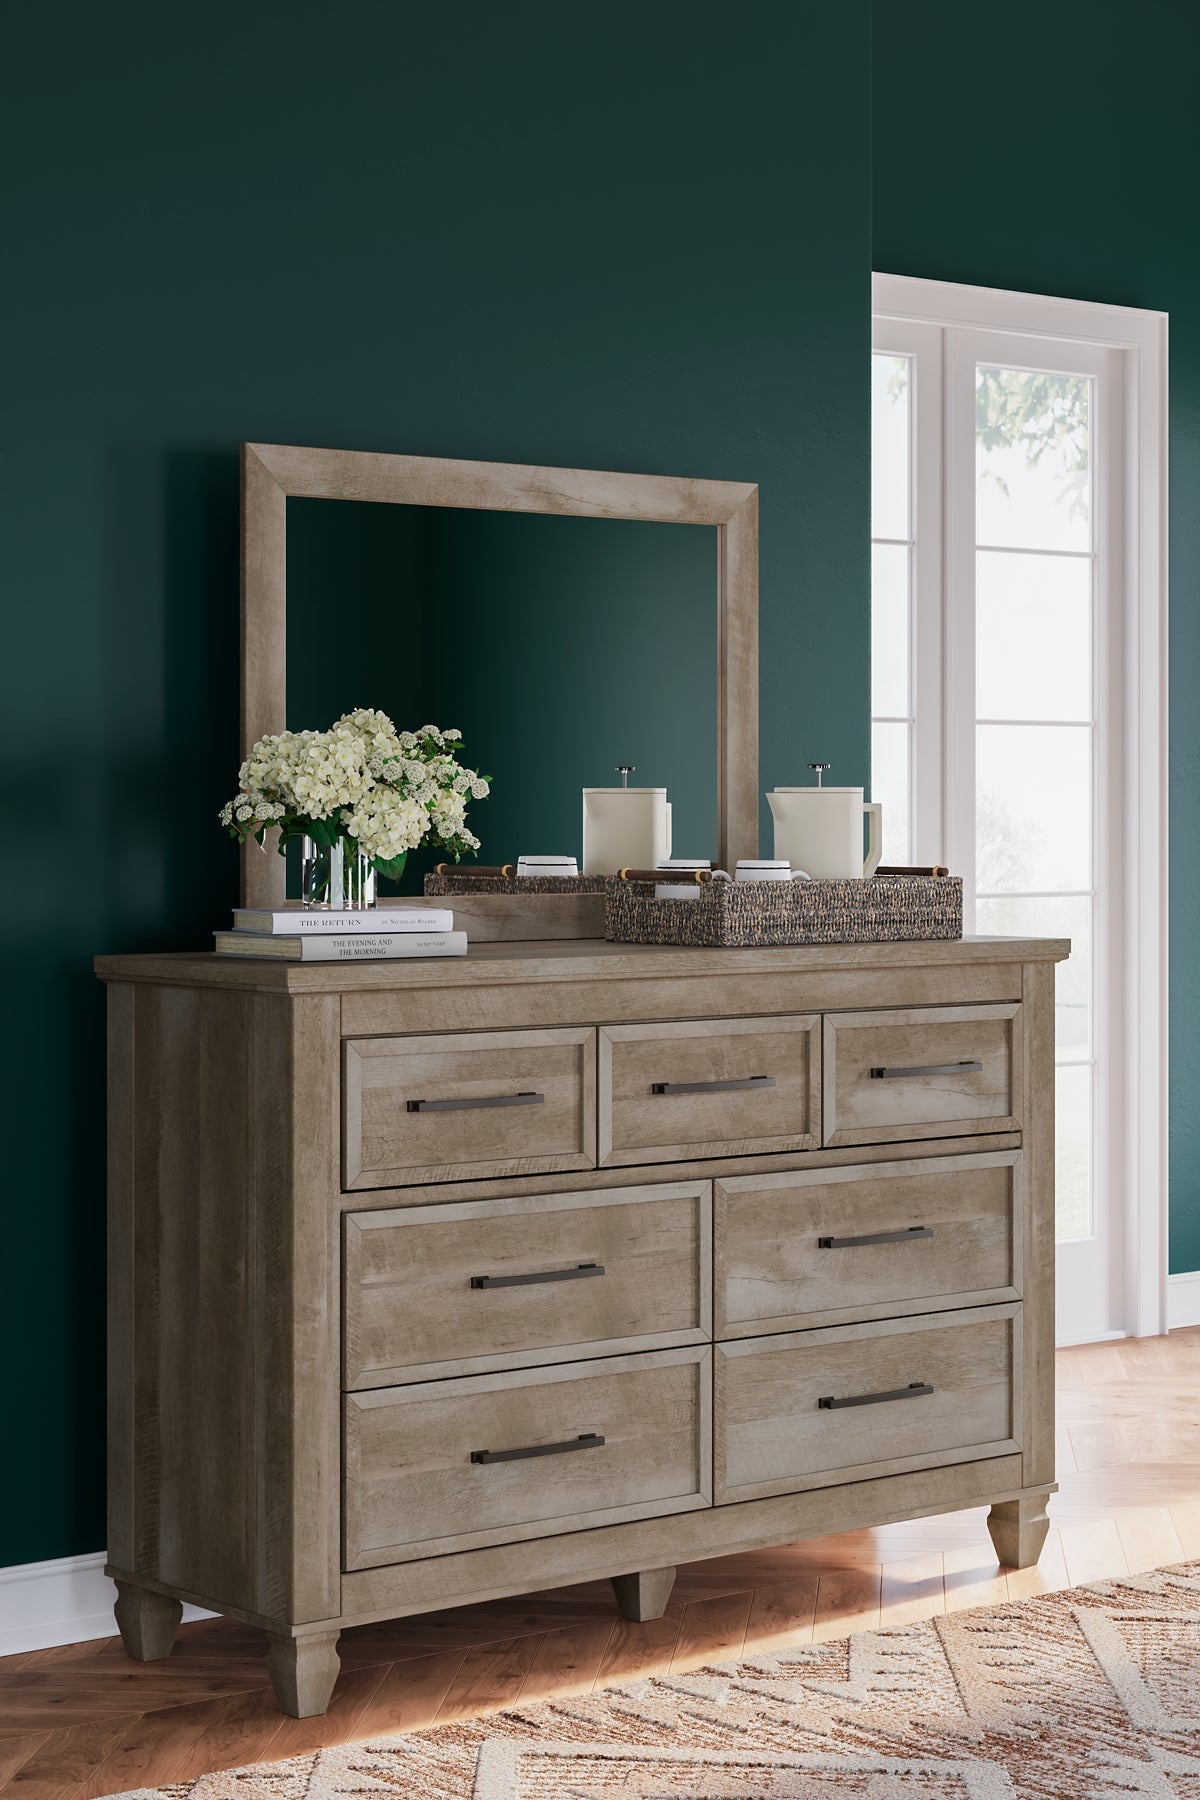 Yarbeck King Panel Bed with Mirrored Dresser, Chest and Nightstand at Towne & Country Furniture (AL) furniture, home furniture, home decor, sofa, bedding